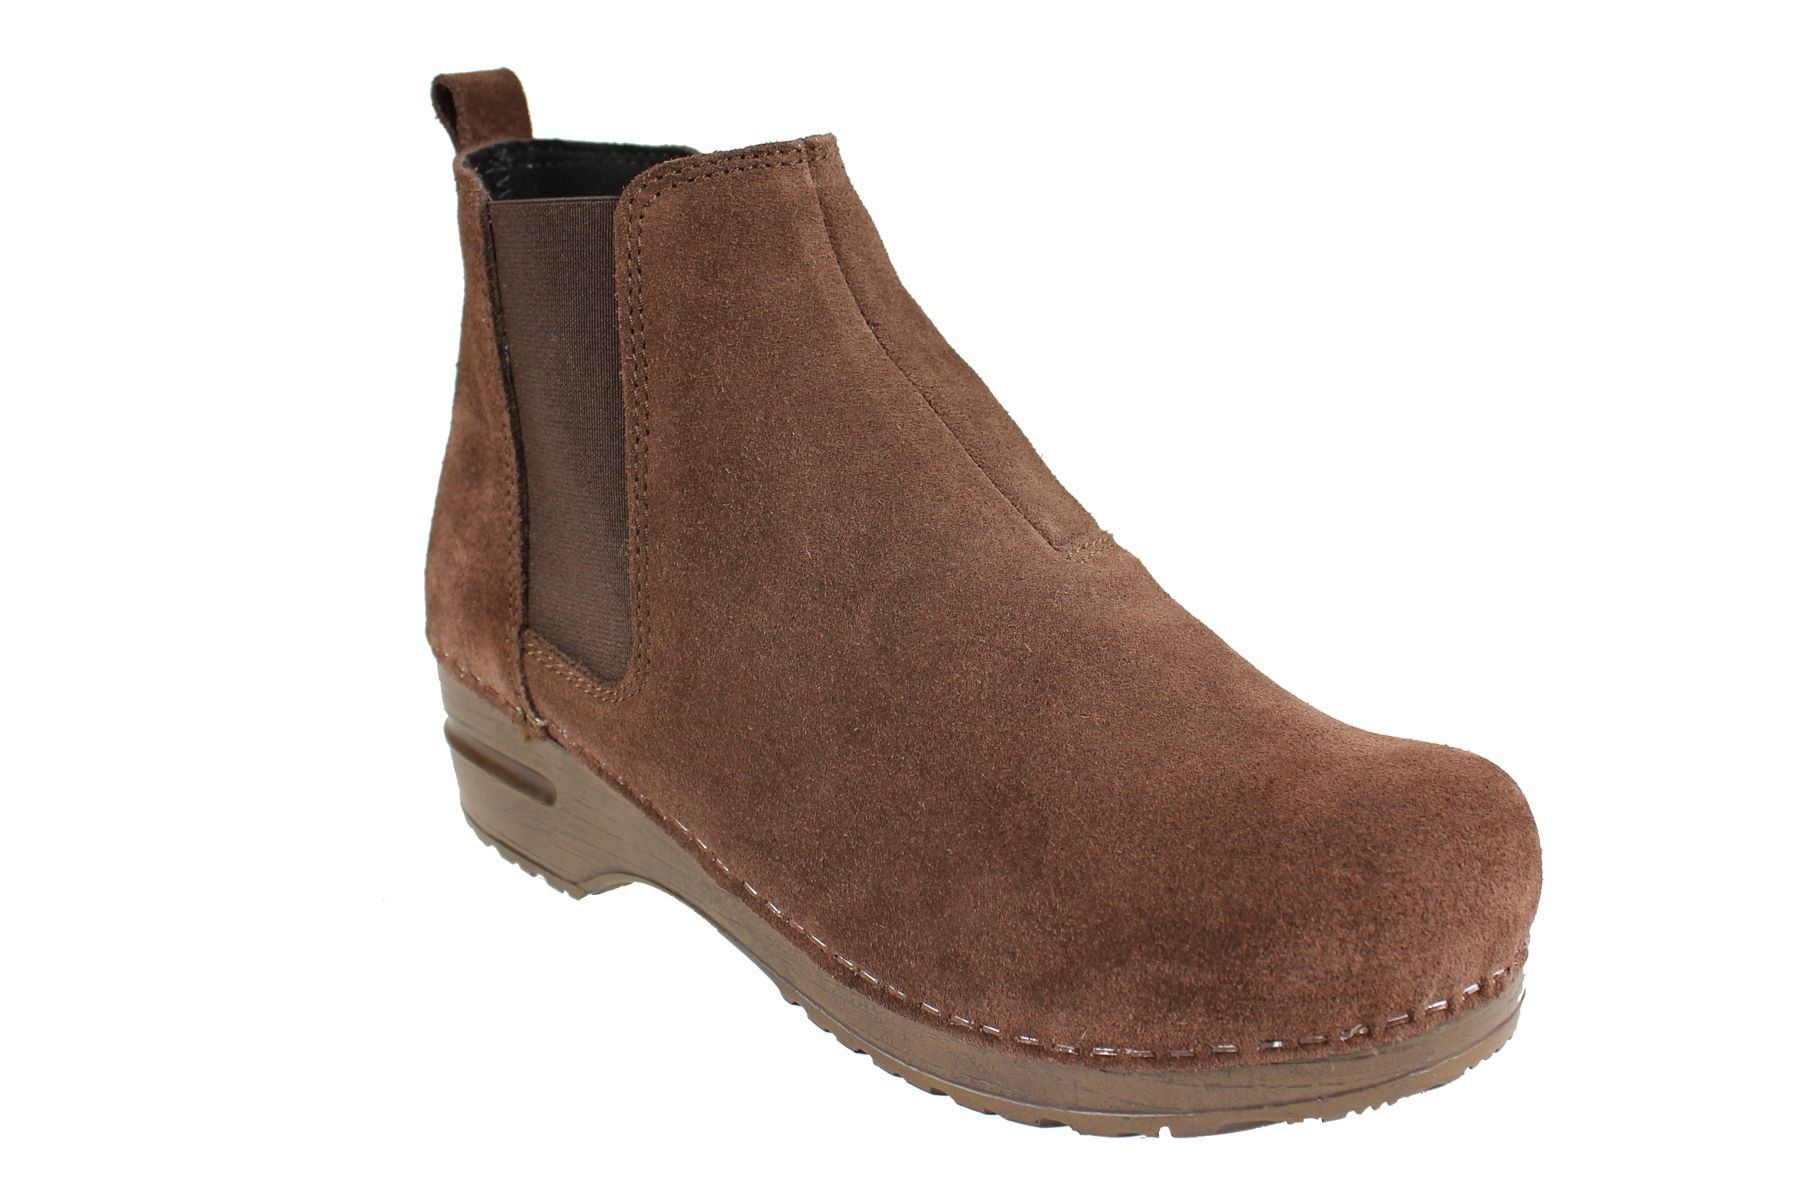 Sanita Vaika Soft Sole Boot in Suede Leather in Antique Brown